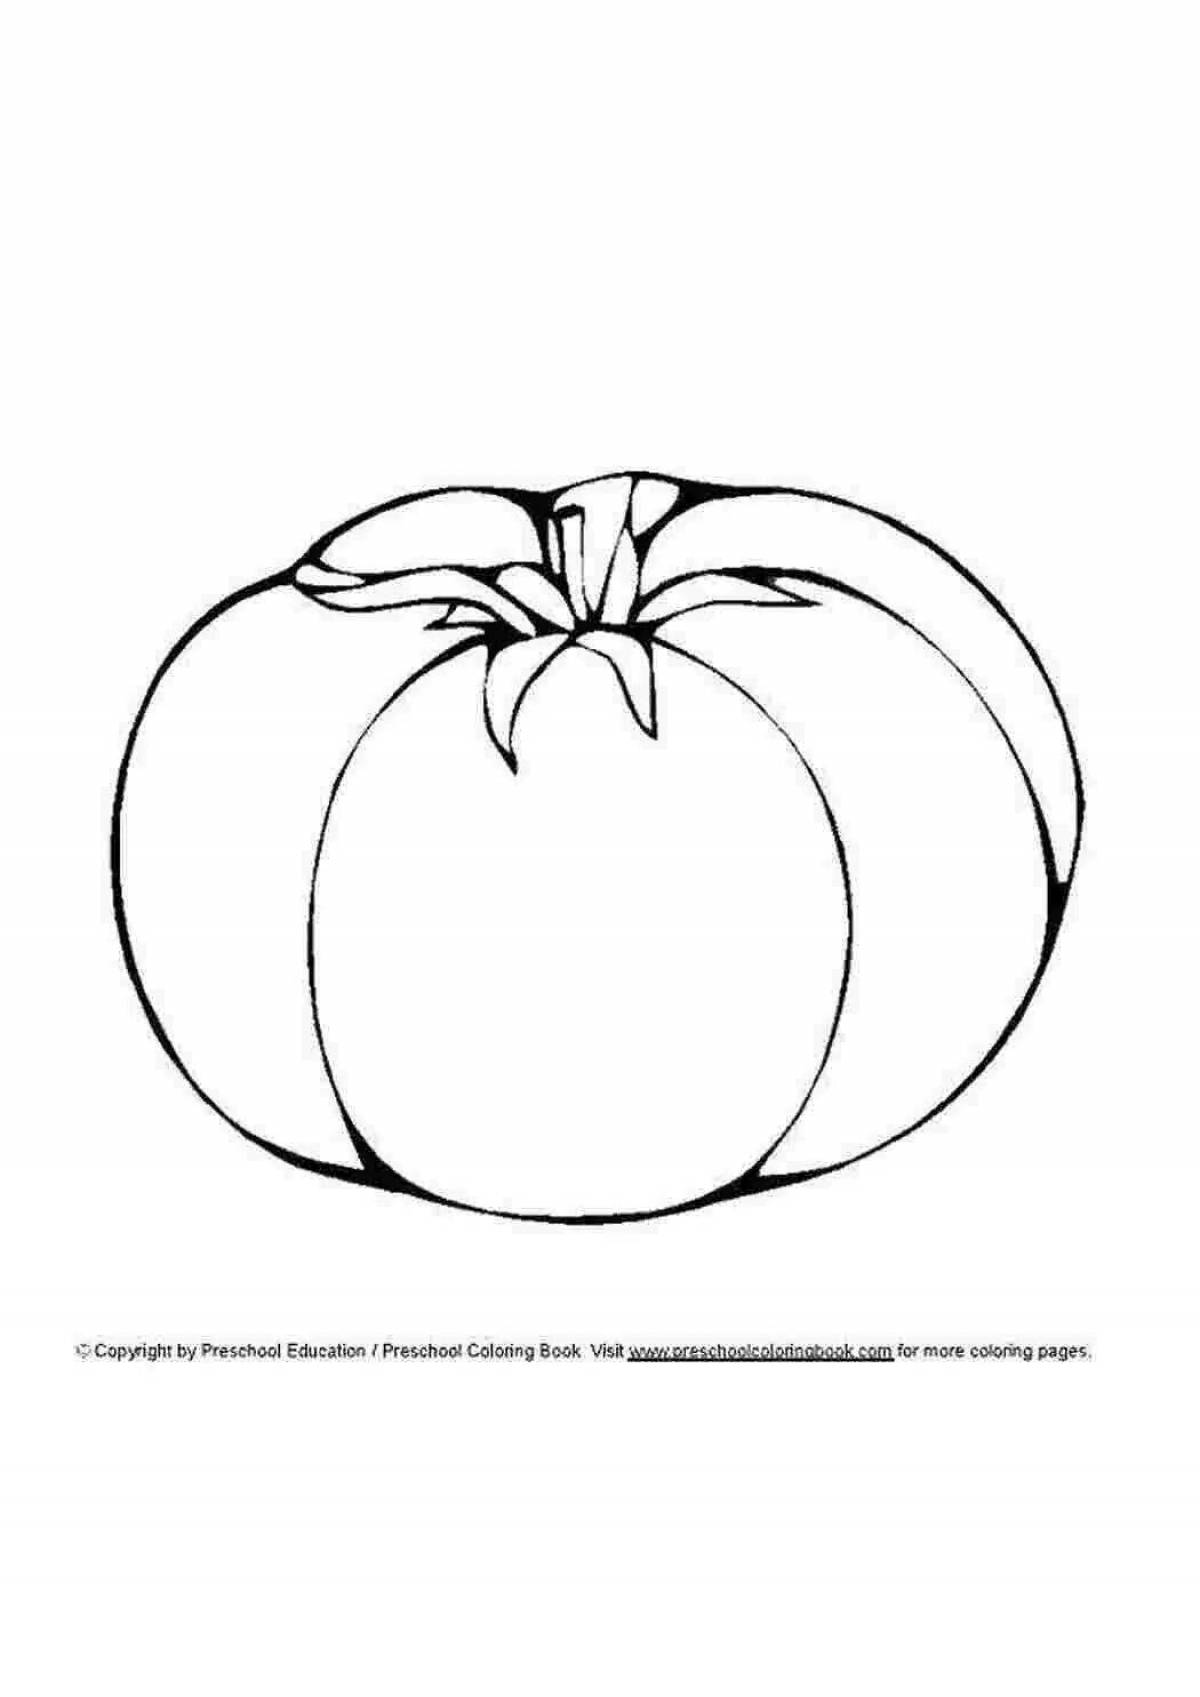 Fun vegetable coloring book for 2-3 year olds